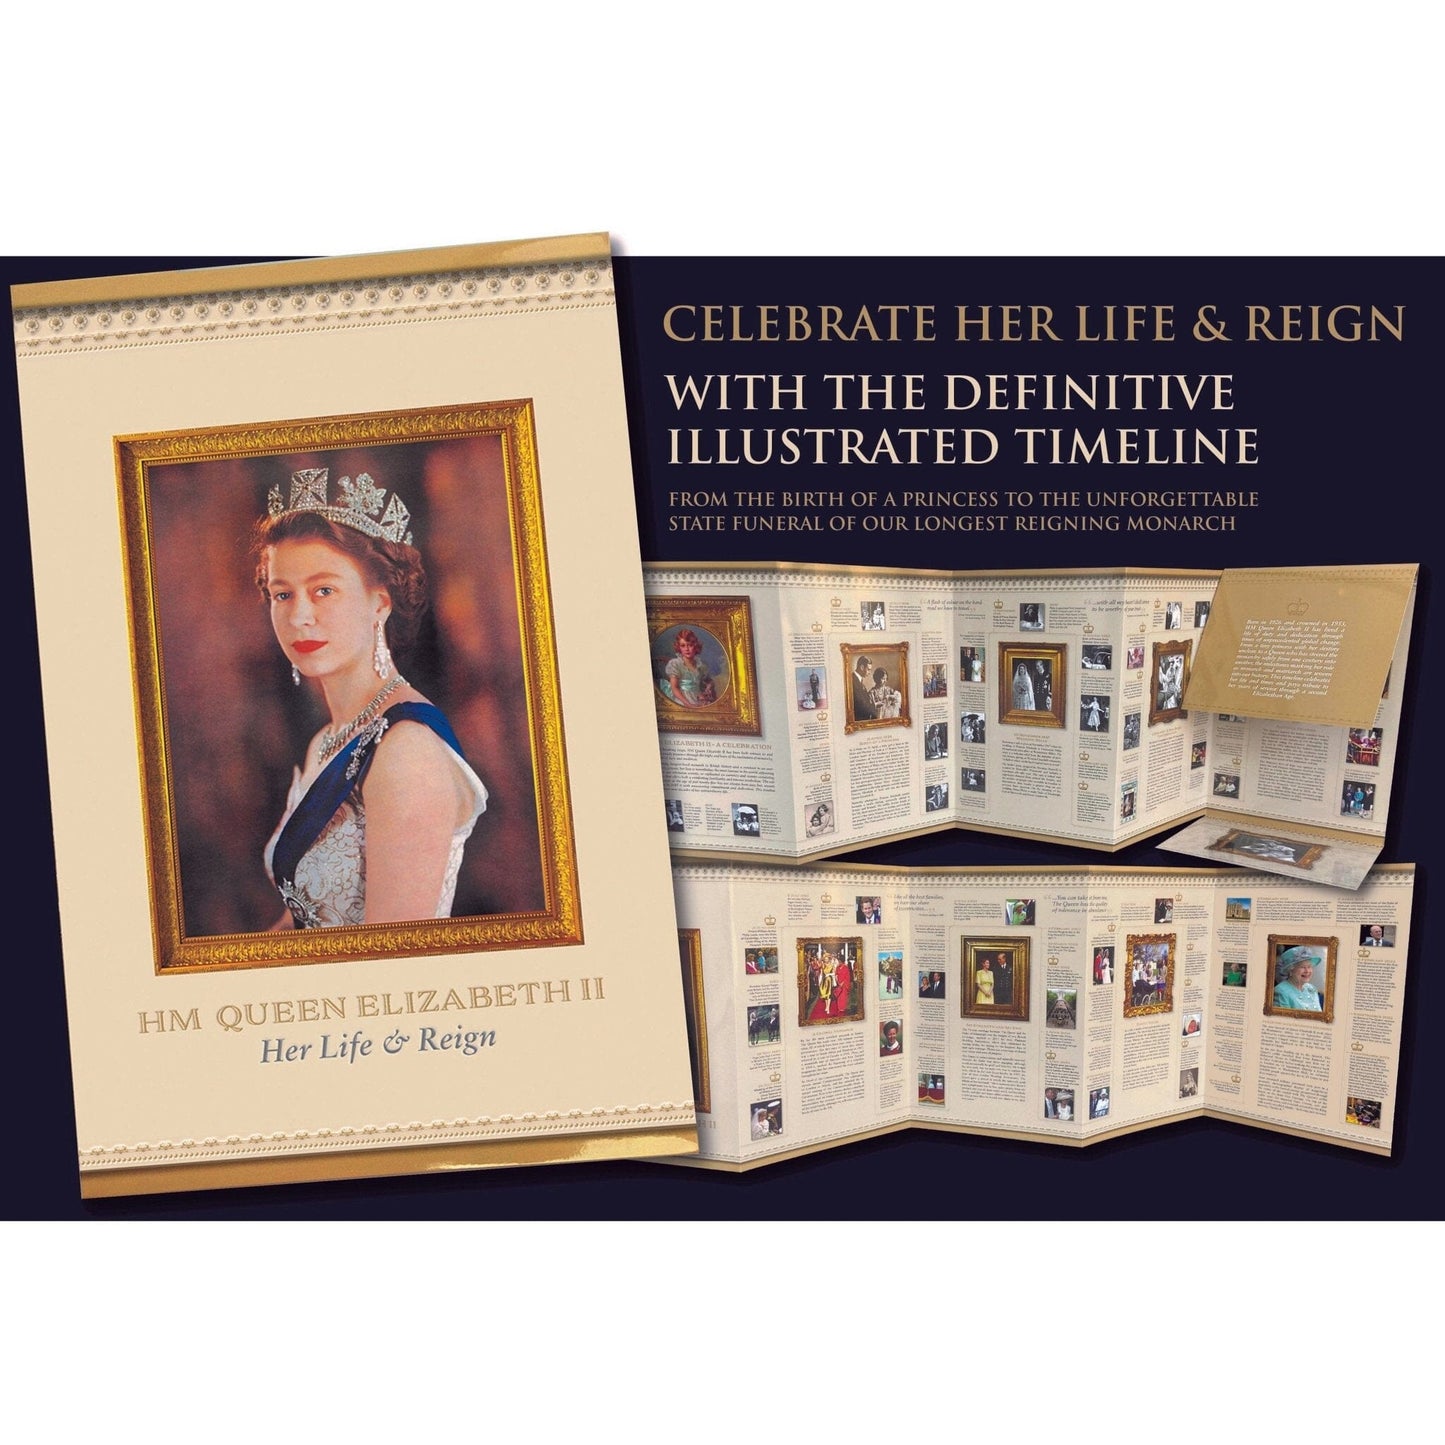 H.M. Queen Elizabeth II Timeline Books ABF The Soldiers' Charity Shop 